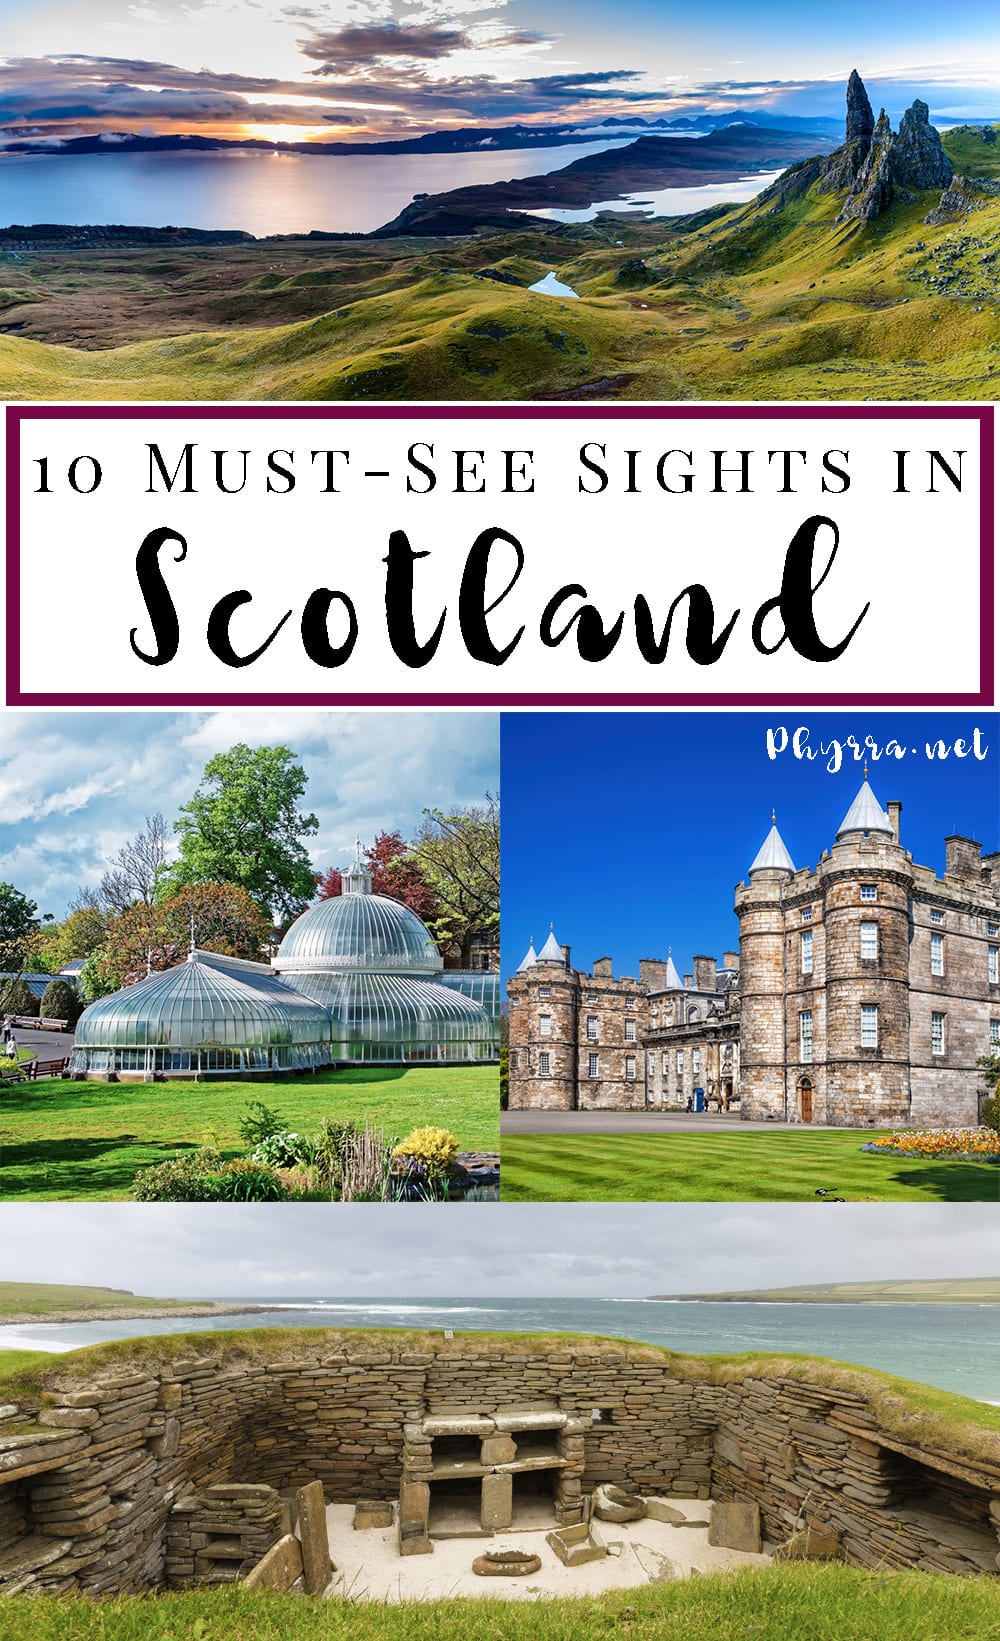 10 Must-See Sights in Scotland